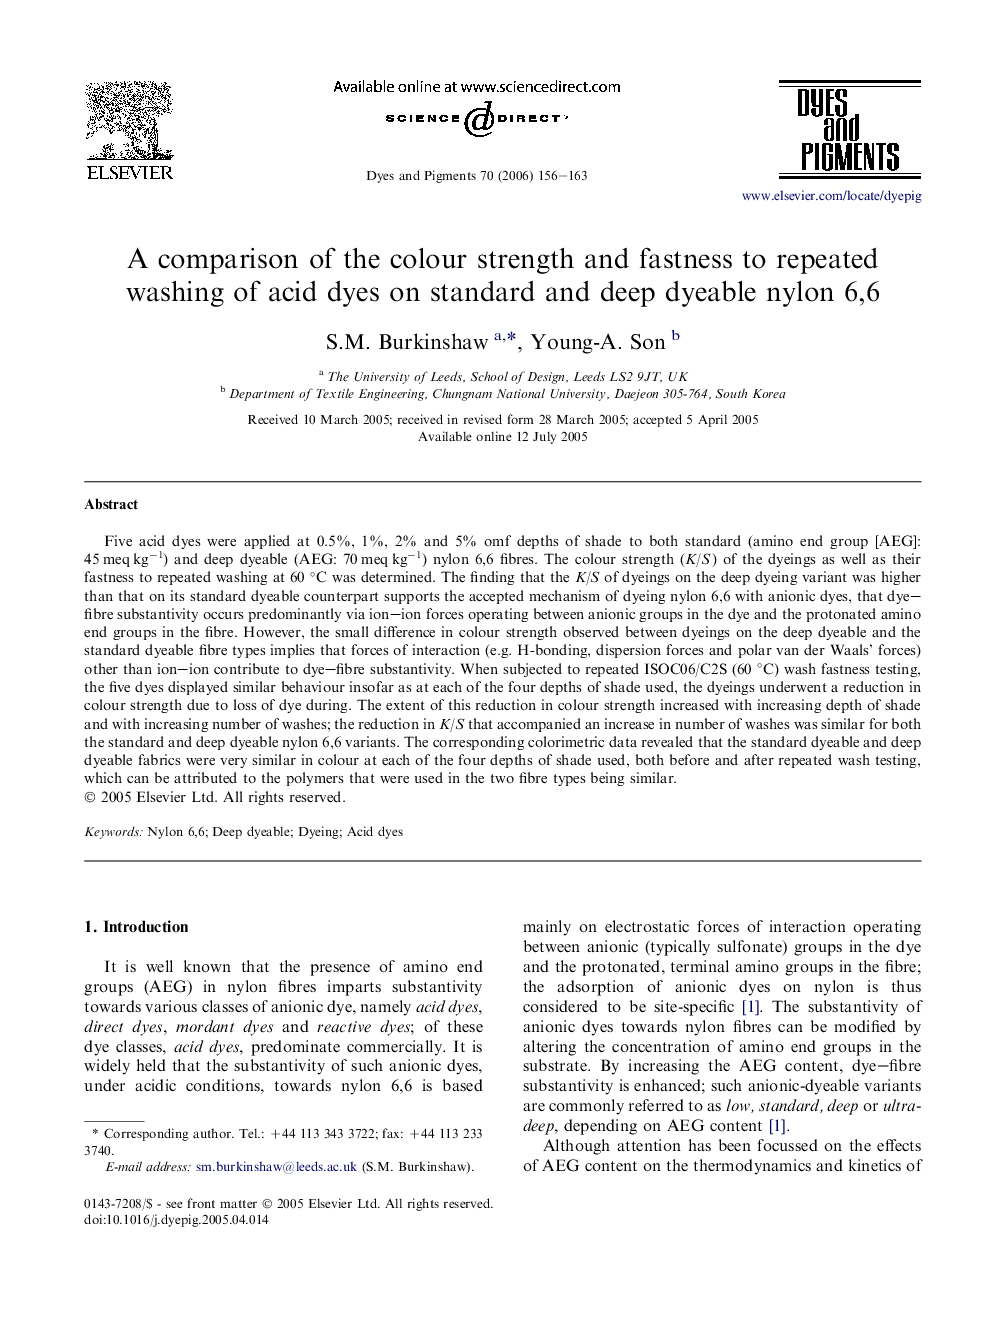 A comparison of the colour strength and fastness to repeated washing of acid dyes on standard and deep dyeable nylon 6,6